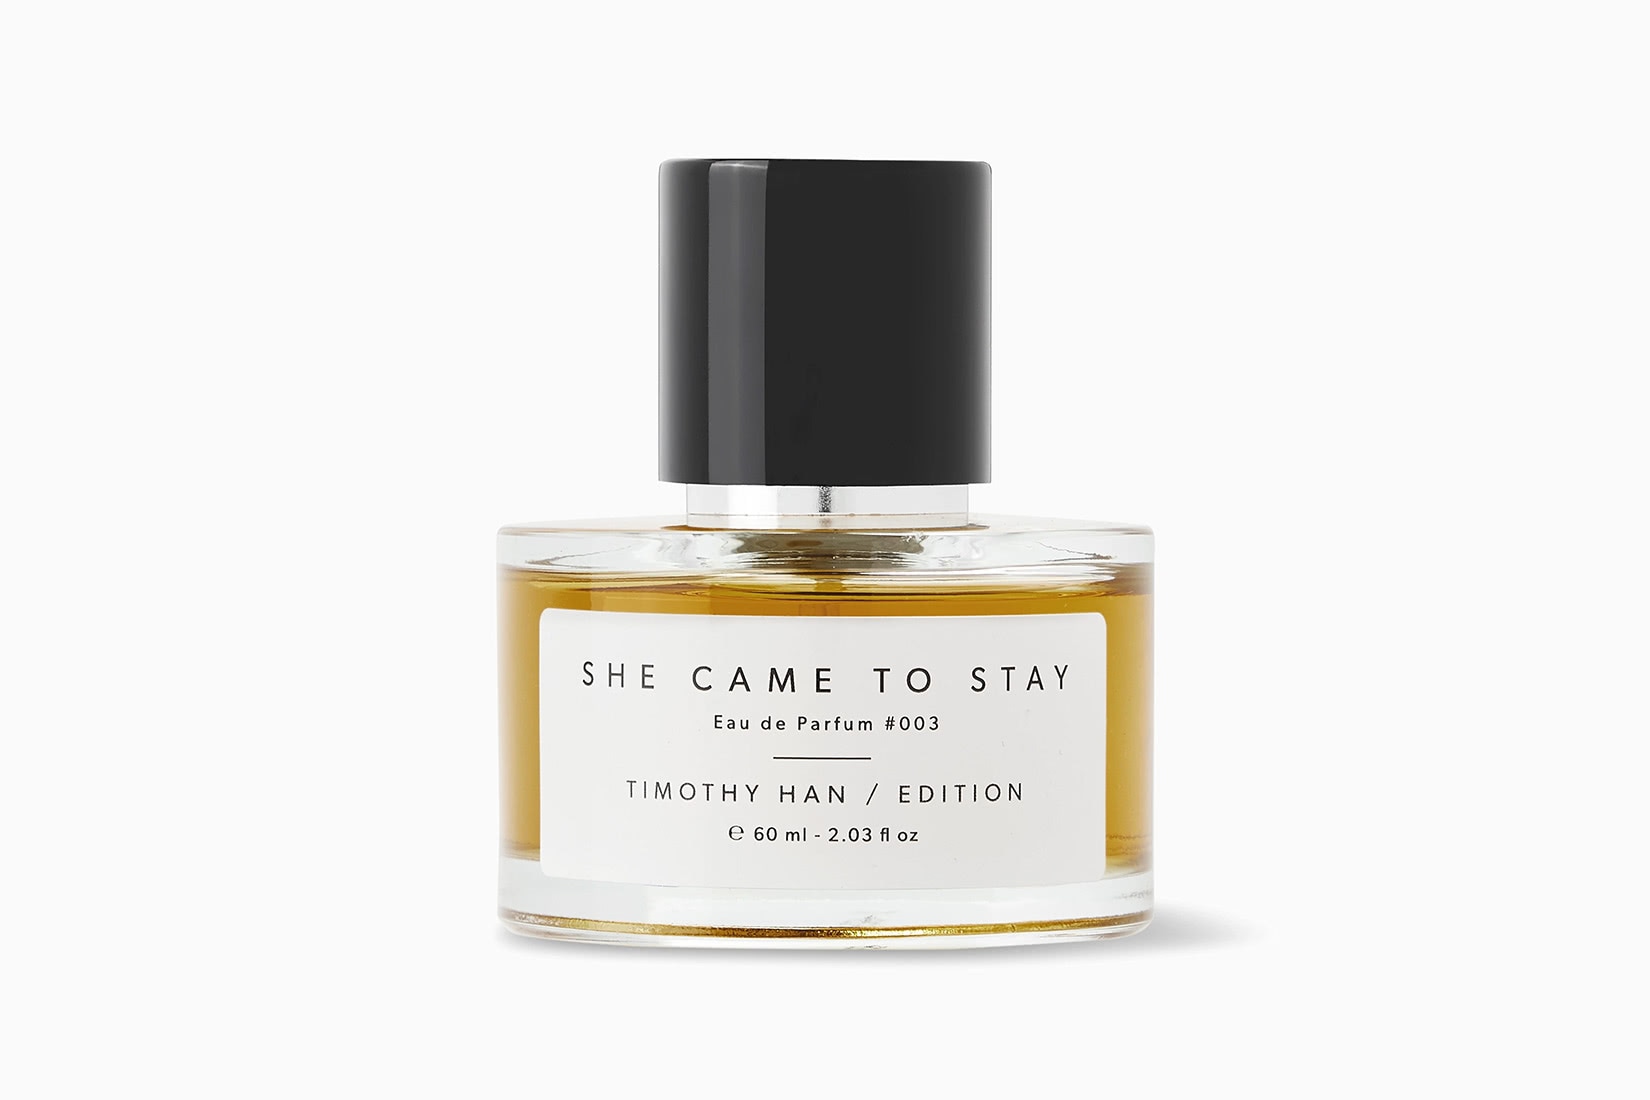 eau de cologne pour homme timothy han she came to stay - Luxe Digital